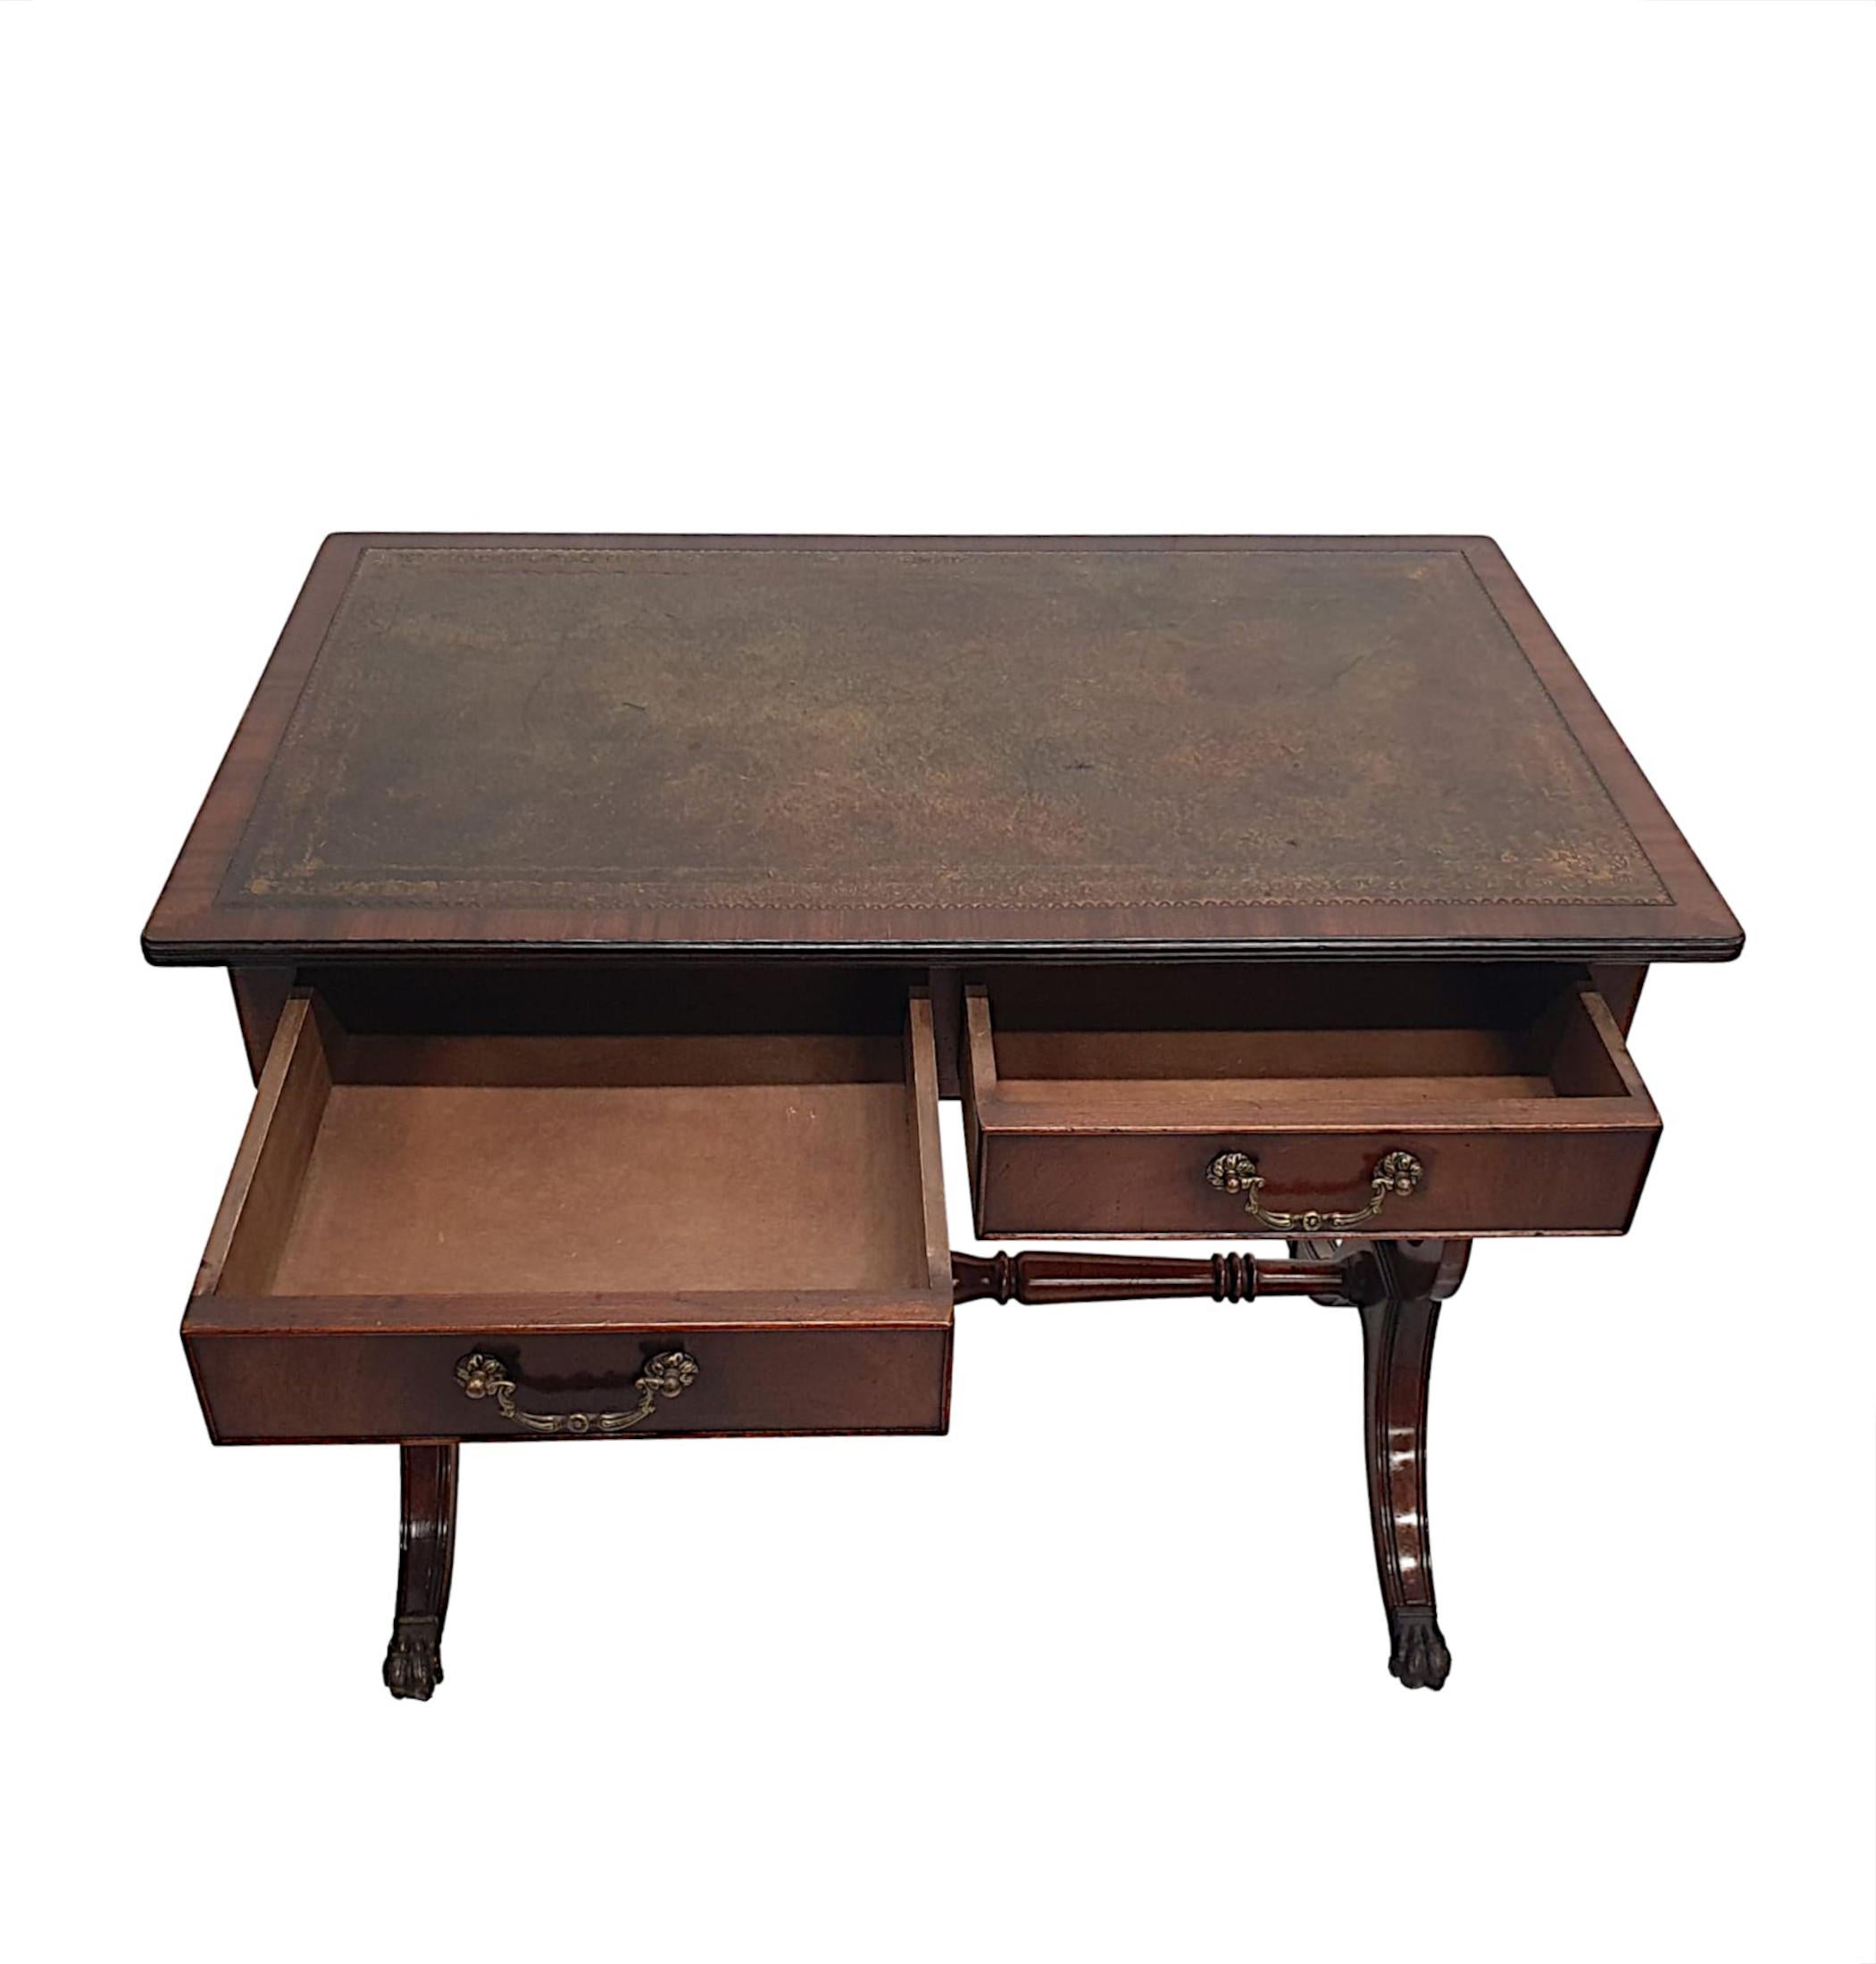 20th Century Very Fine 1920s Leather Top Desk or Sofa Table For Sale